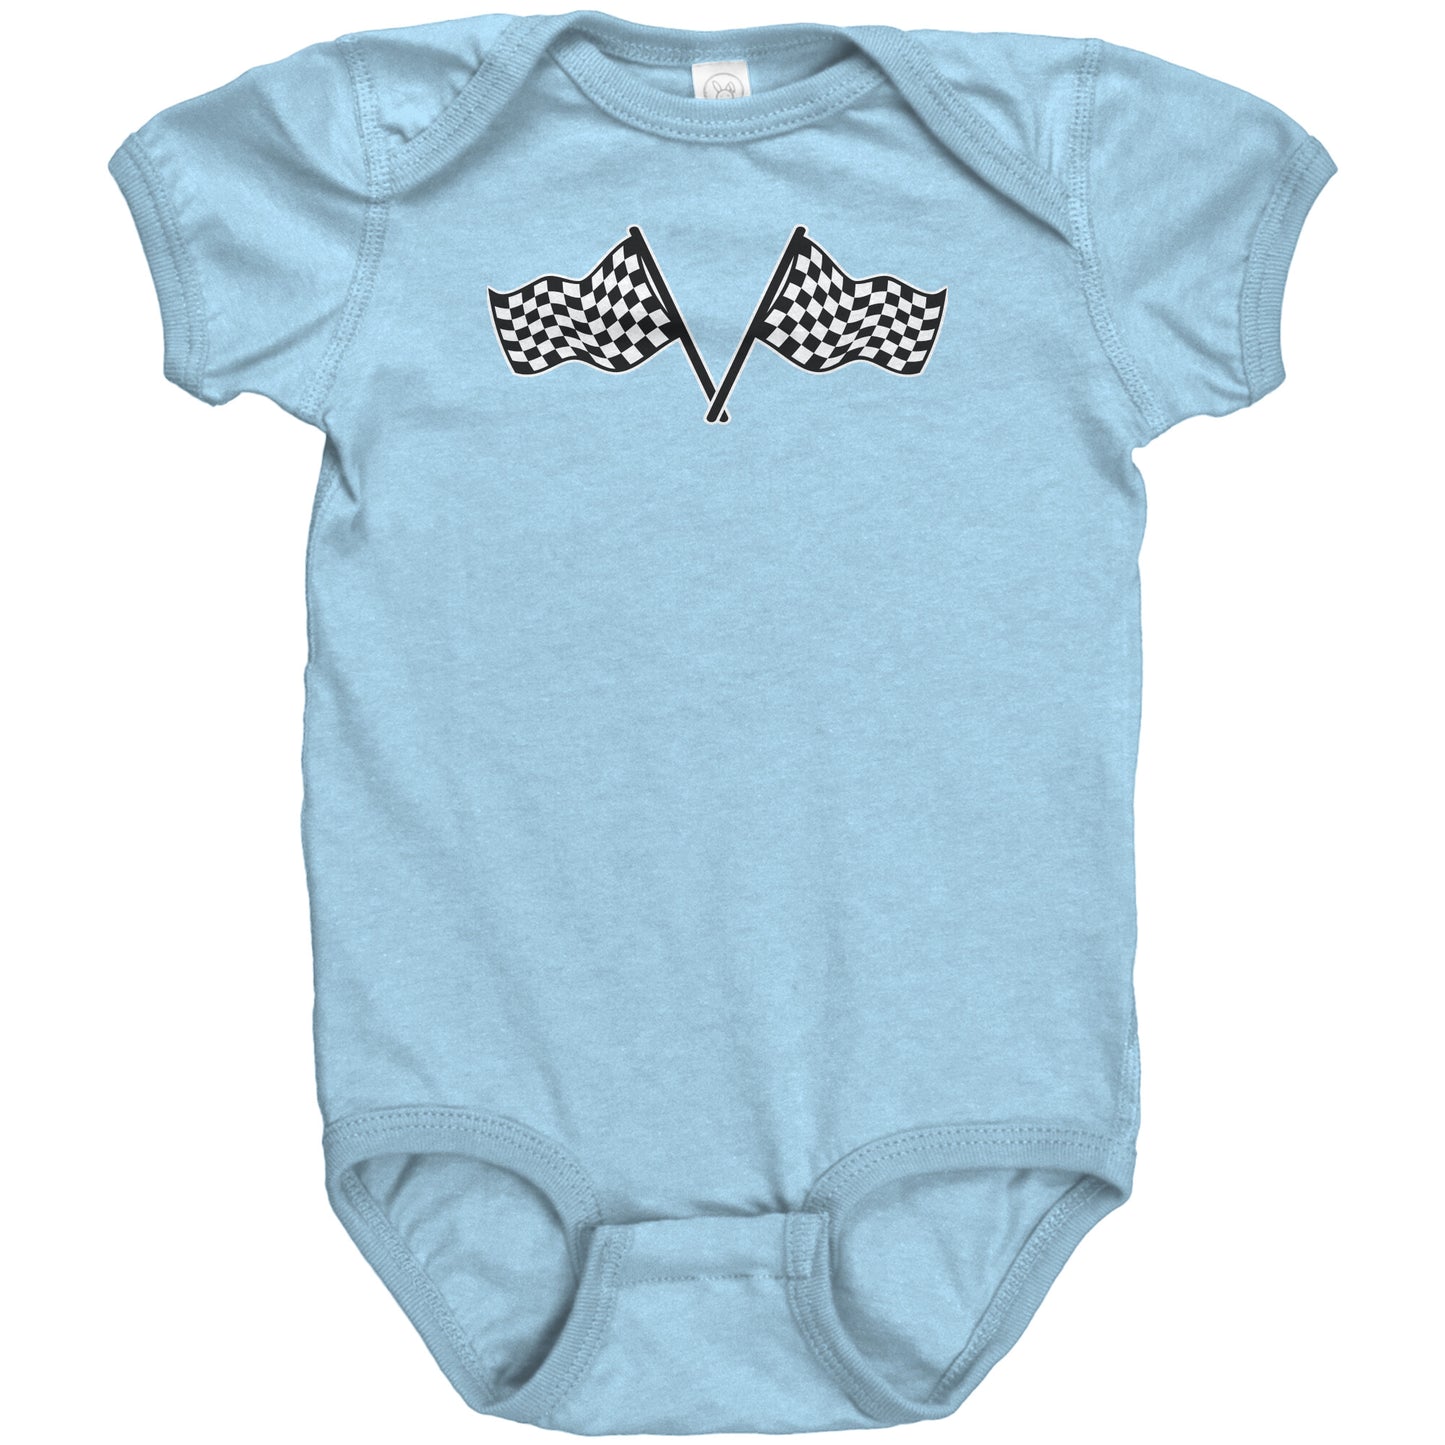 DOUBLE CHECKERED FLAG RACING INFANT BODYSUIT